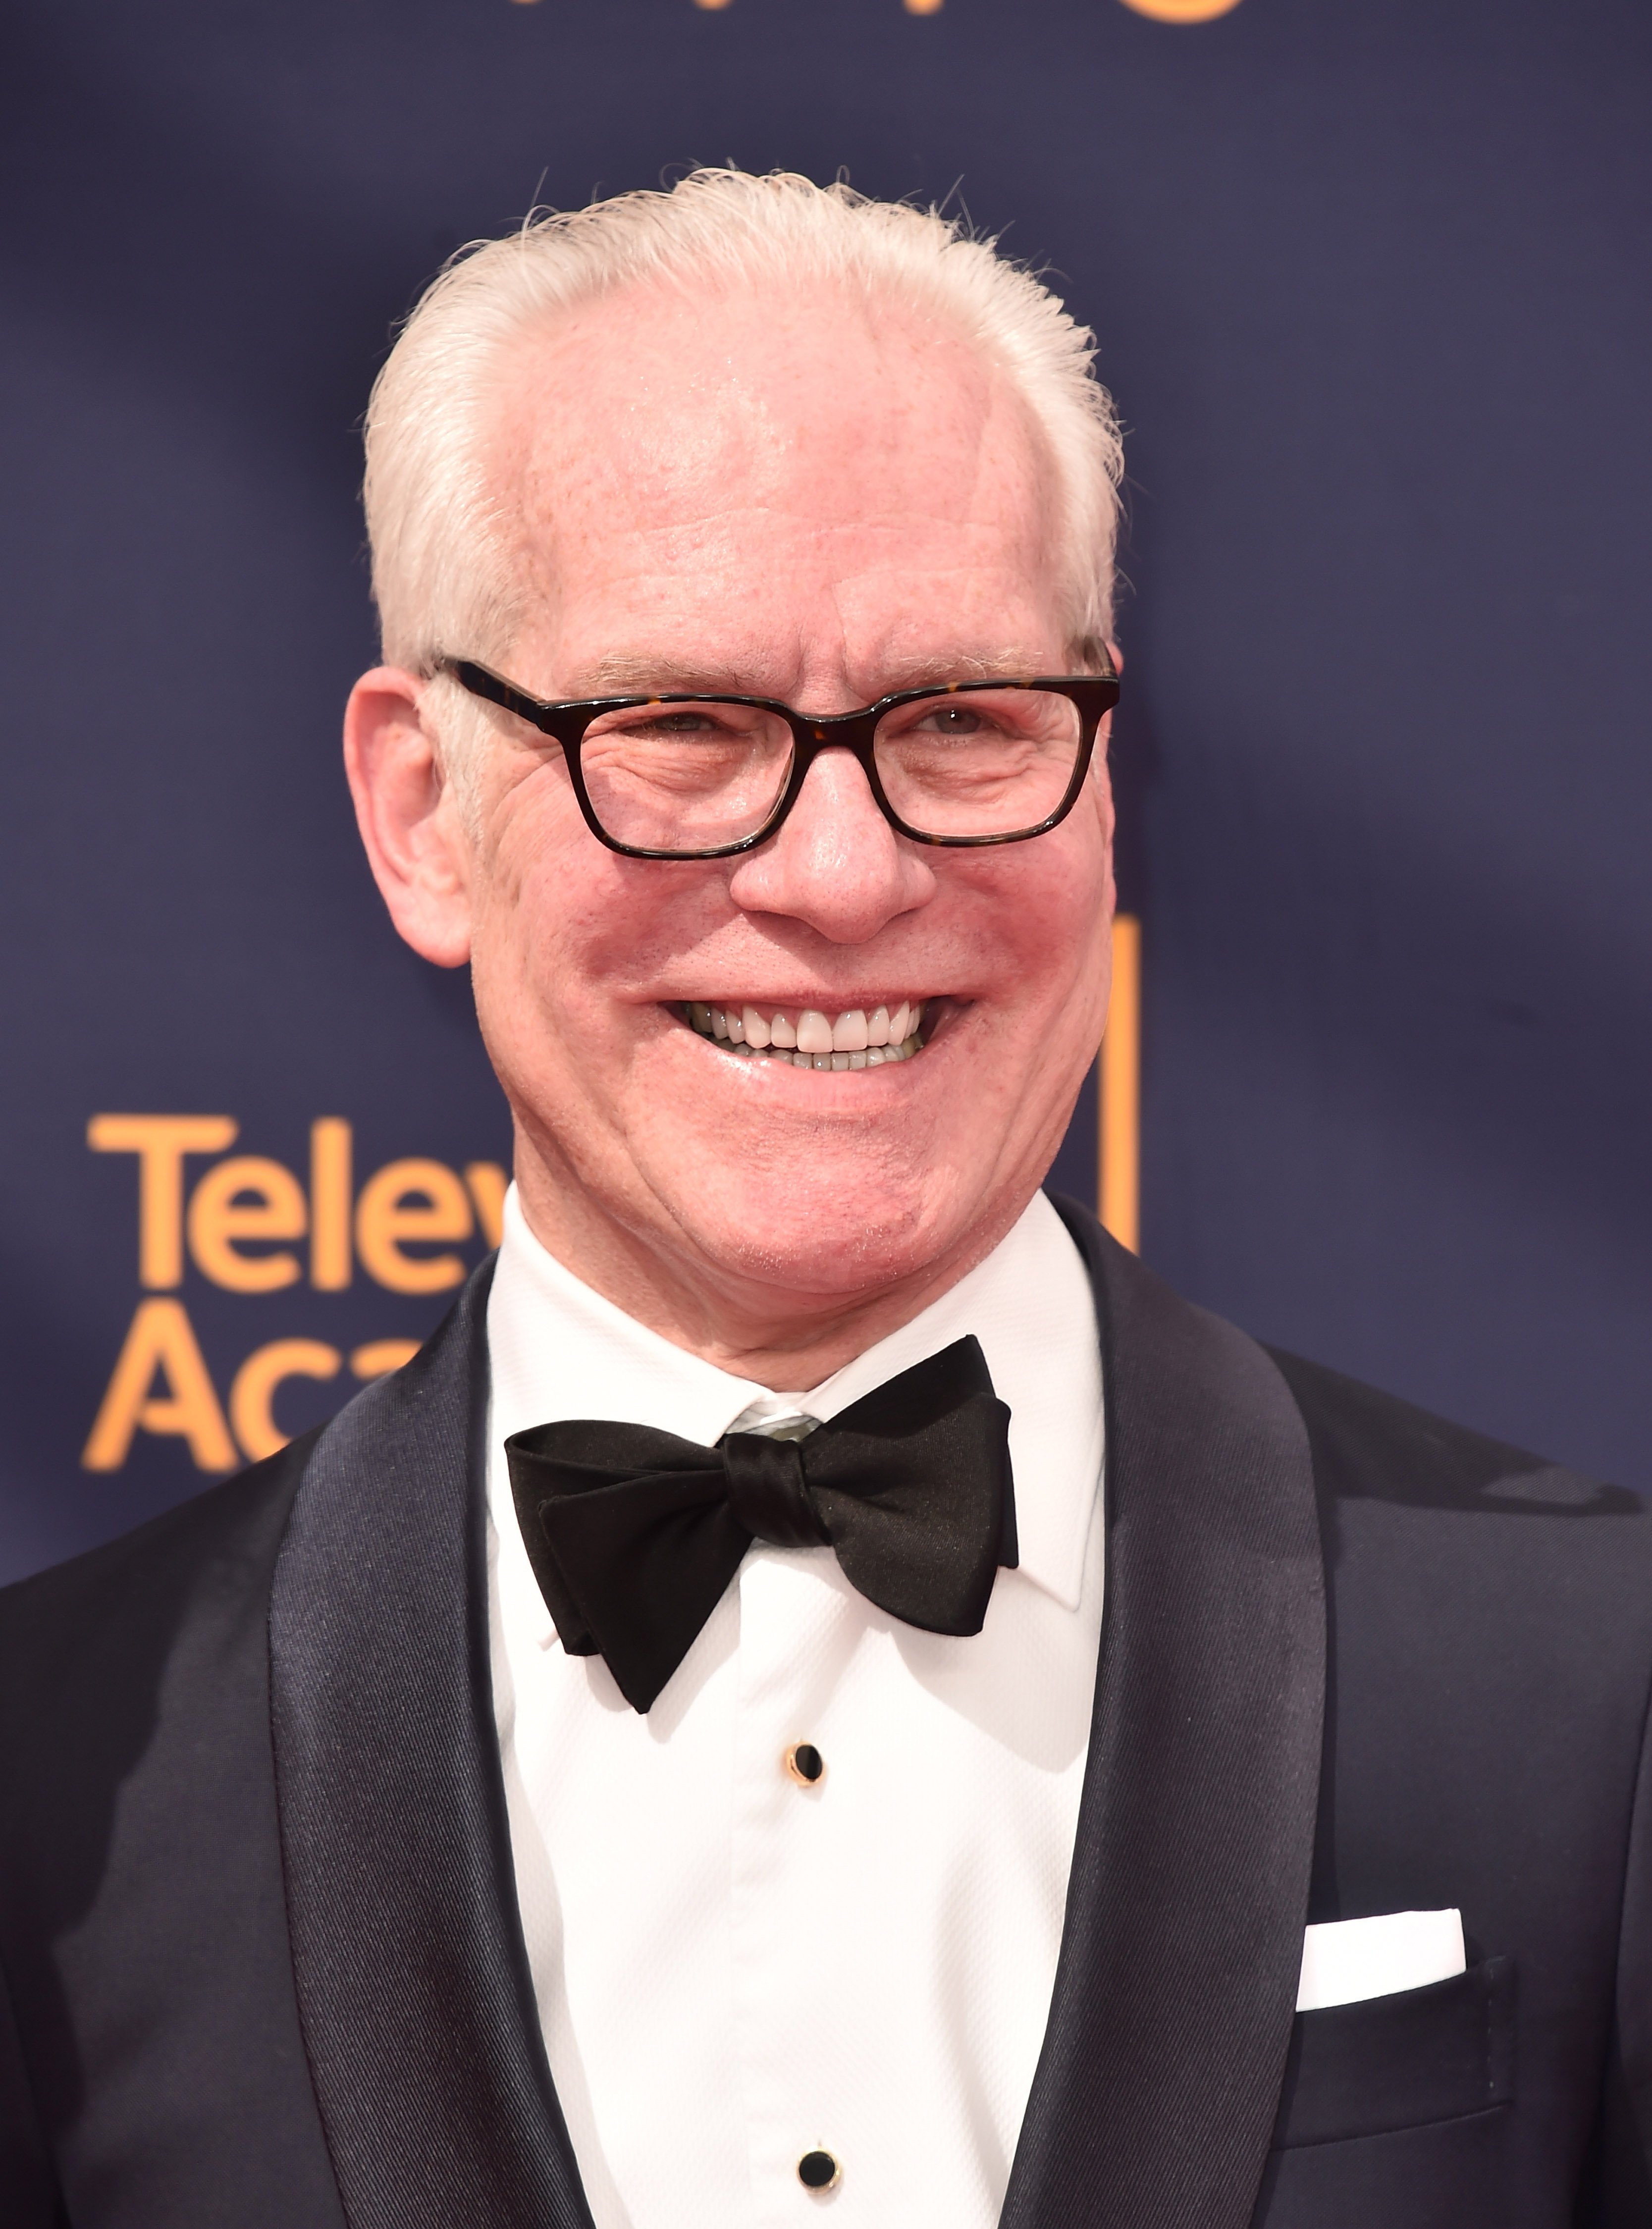 Tim Gunn attends the 2018 Creative Arts Emmys Day 2 at Microsoft Theater on September 9, 2018, in Los Angeles, California. | Source: Getty Images.